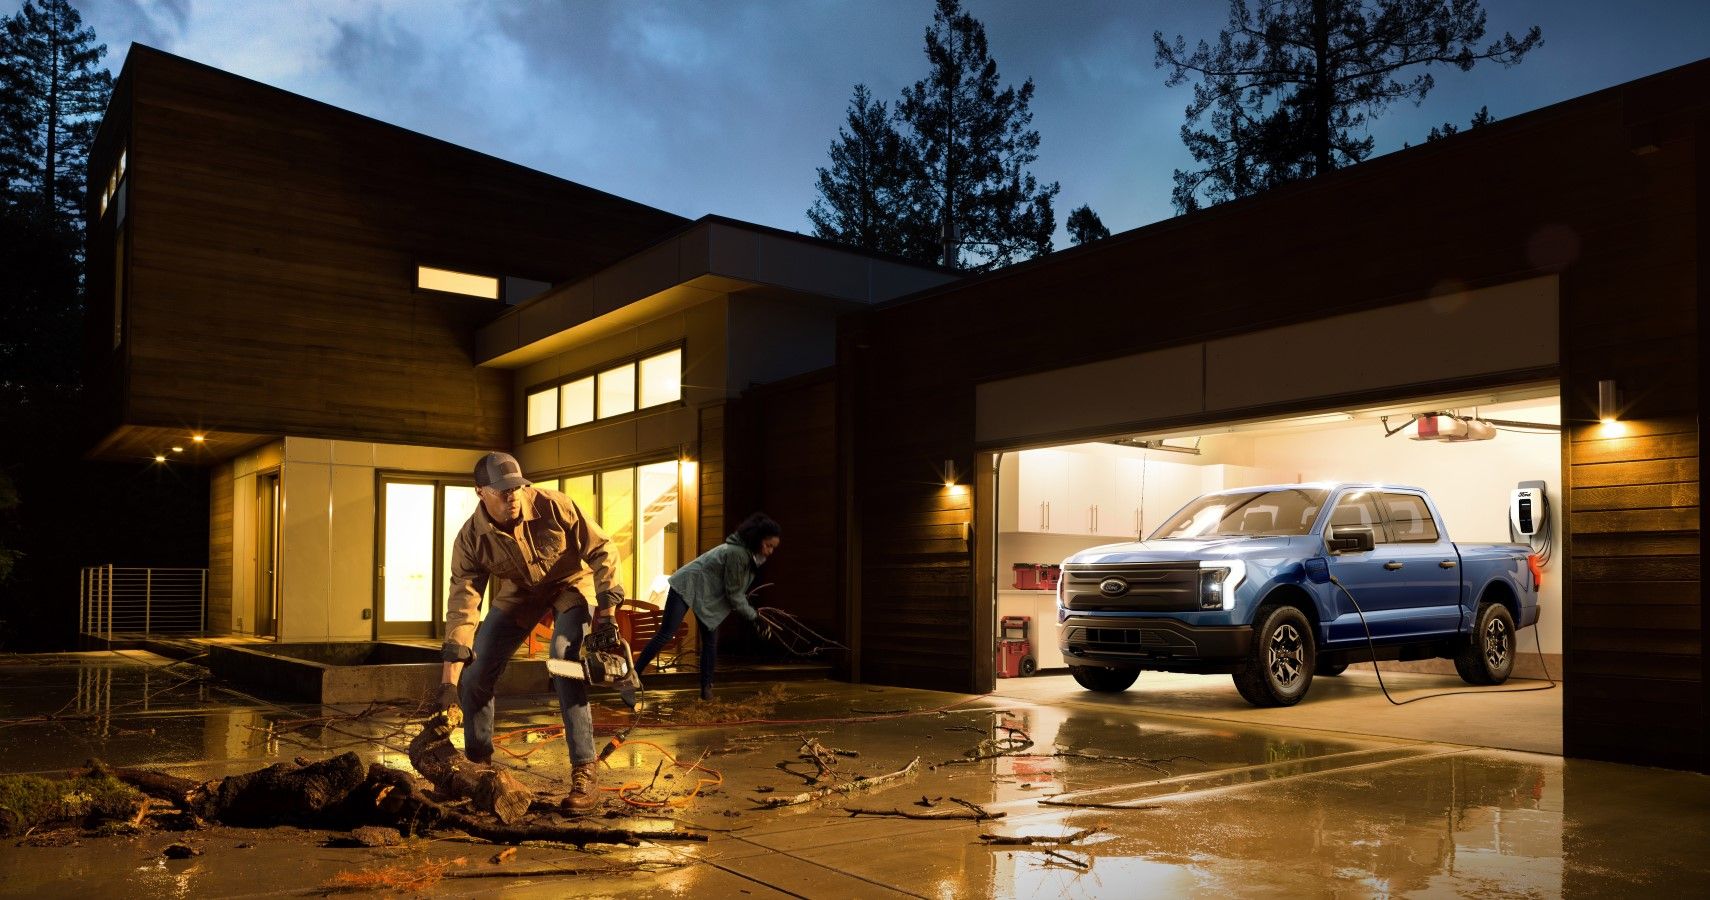 Ford F-150 Lightning home integration system being a boon after a hurricane